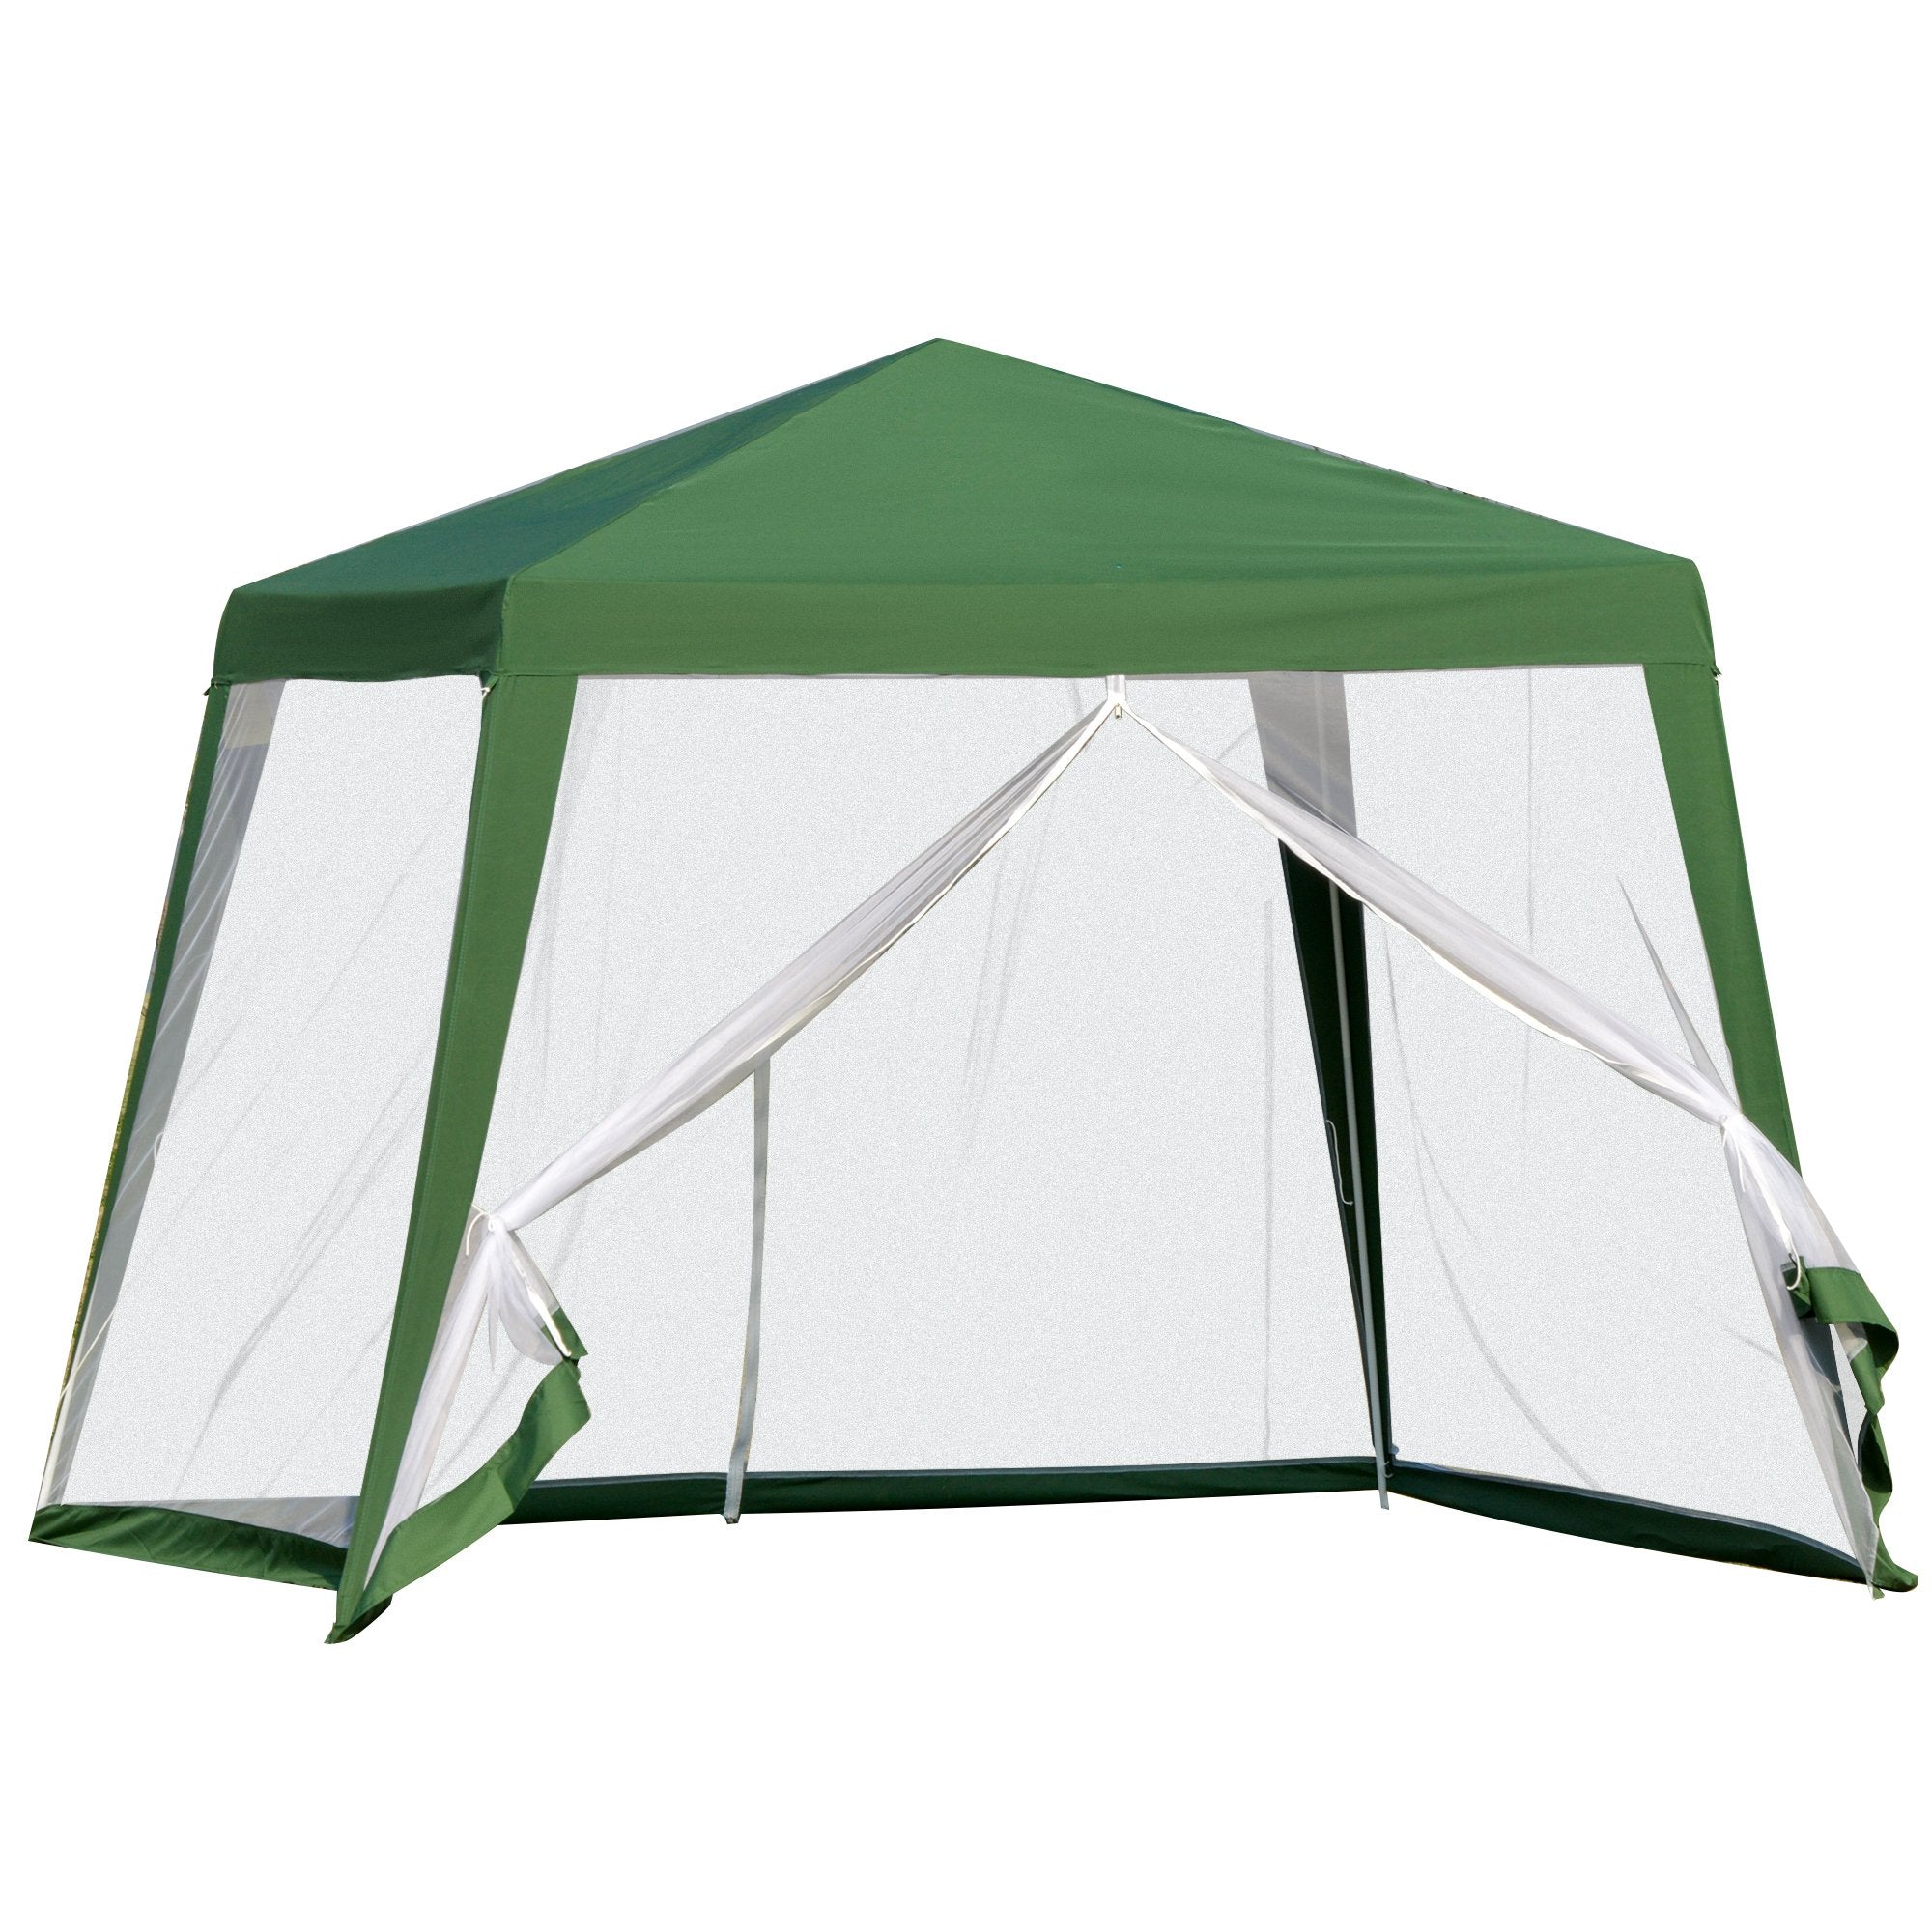 Nancy's Mount Vernon Garden Pavilion - Party Tent - With Mosquito Net - Polyester - Green - 300 x 300 cm